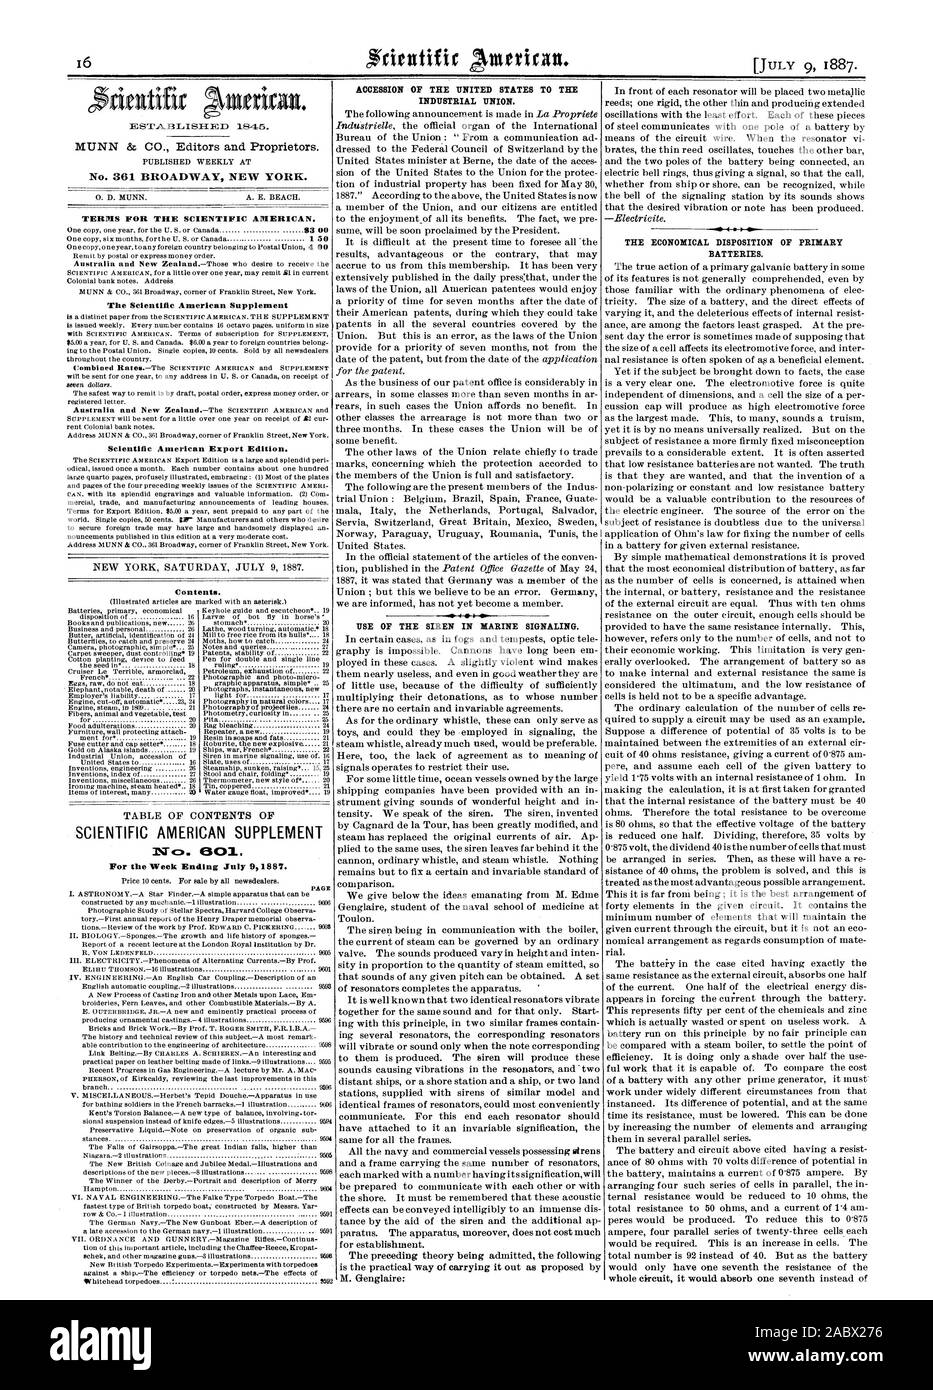 Week Ending July 91887. PAGE ACCESSION OF THE UNITED STATES TO THE INDUSTRIAL UNION. USE OF THE SIREN IN MARINE SIGNALING. THE ECONOMICAL DISPOSITION OF PRIMARY BATTERIES., scientific american, 1887-07-09 Stock Photo